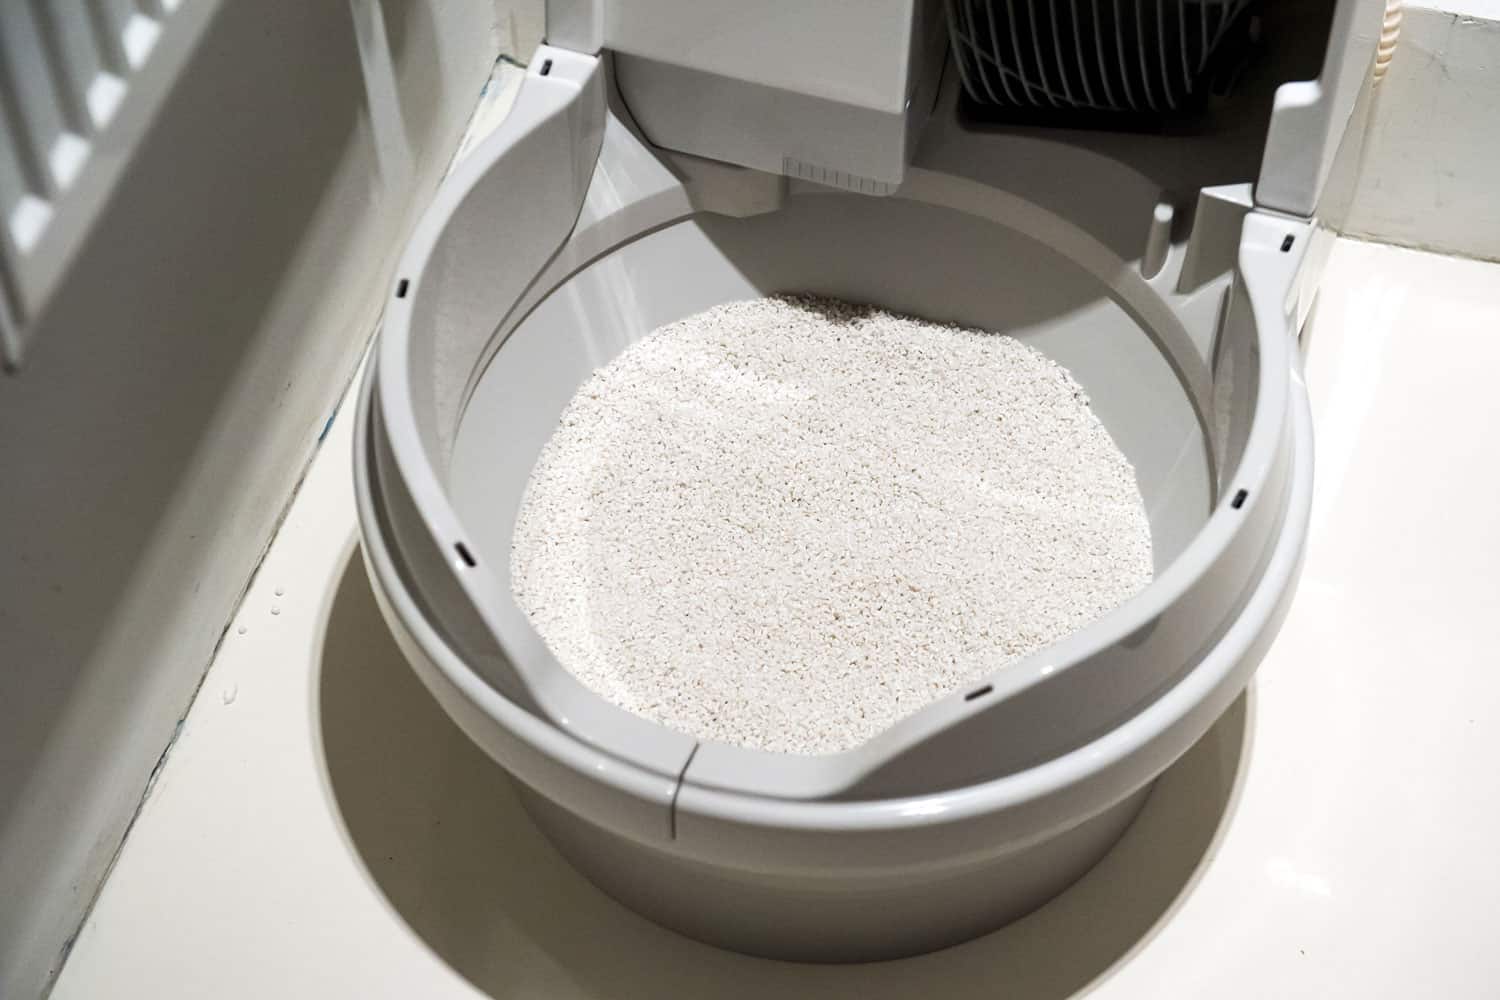 Newly cleaned litter tray of automatic cat litter box